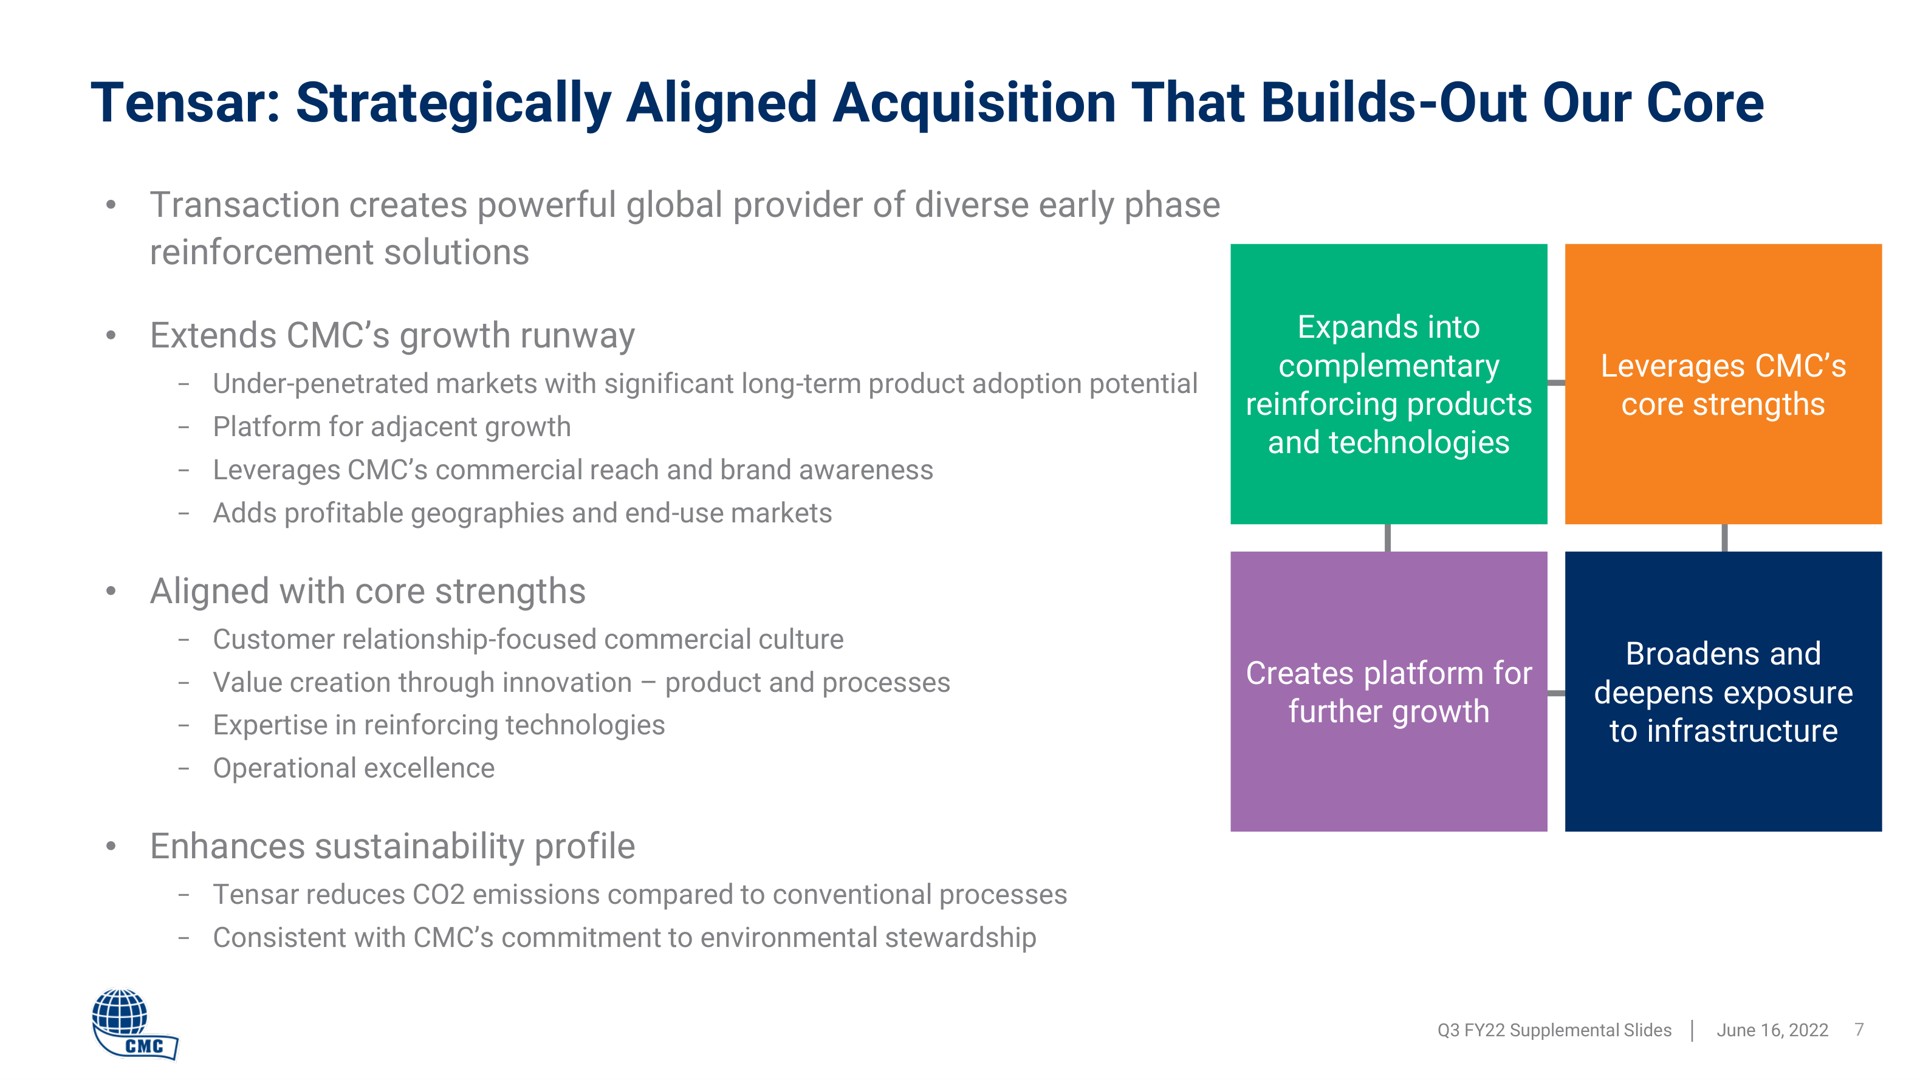 strategically aligned acquisition that builds out our core transaction creates powerful global provider of diverse early phase reinforcement solutions extends growth runway aligned with core strengths enhances profile in reinforcing technologies expands into complementary reinforcing products and technologies leverages further deepens exposure to infrastructure dash | Commercial Metals Company